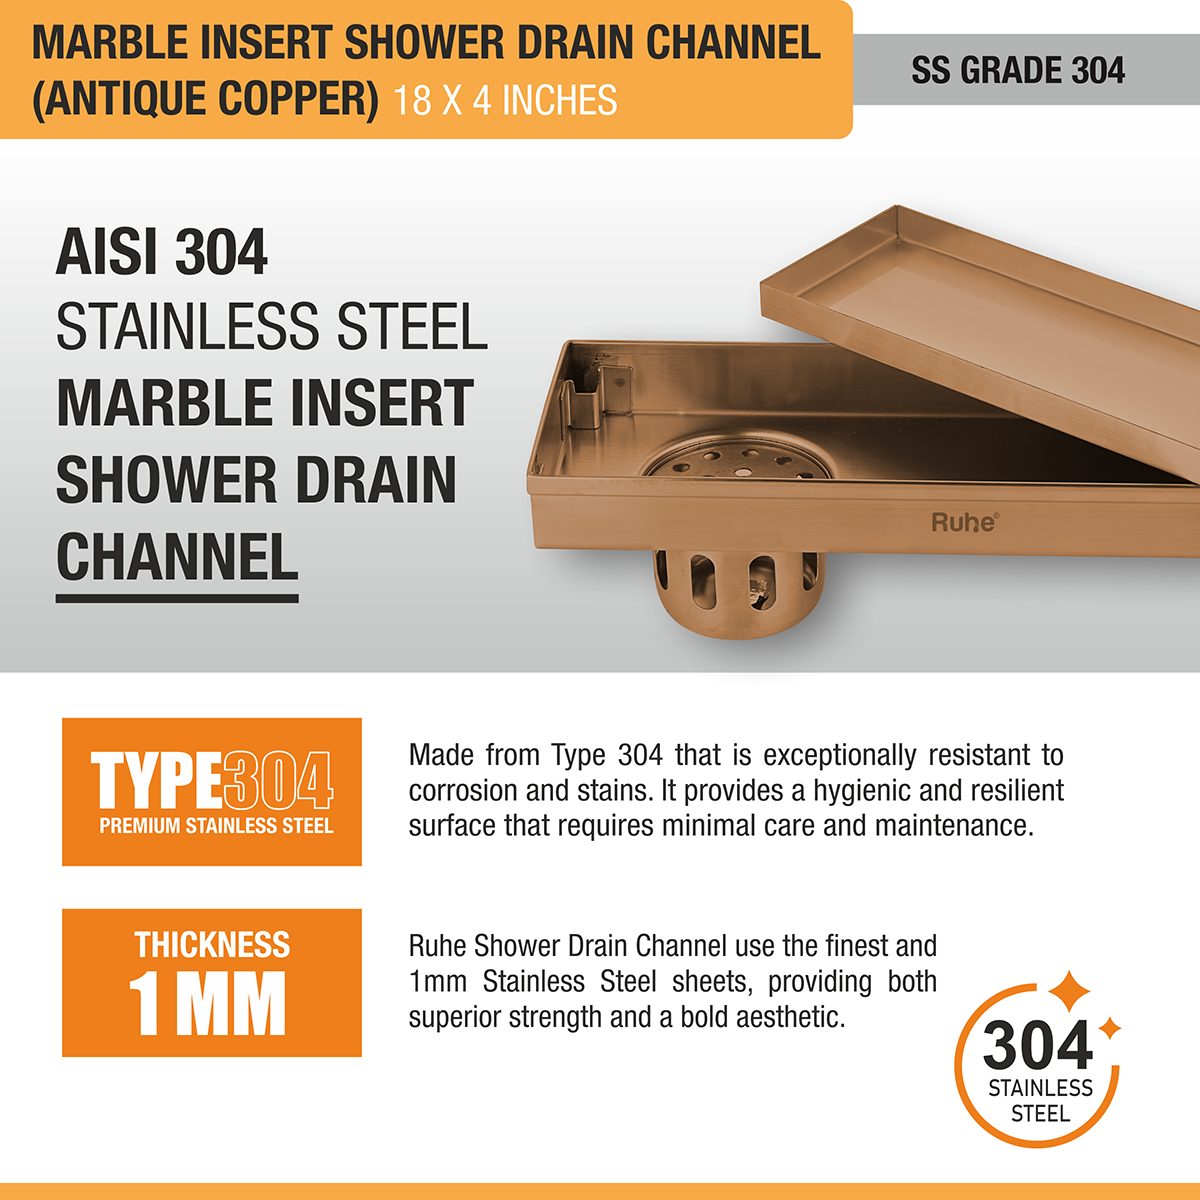 Marble Insert Shower Drain Channel (18 x 4 Inches) ROSE GOLD PVD Coated stainless steel